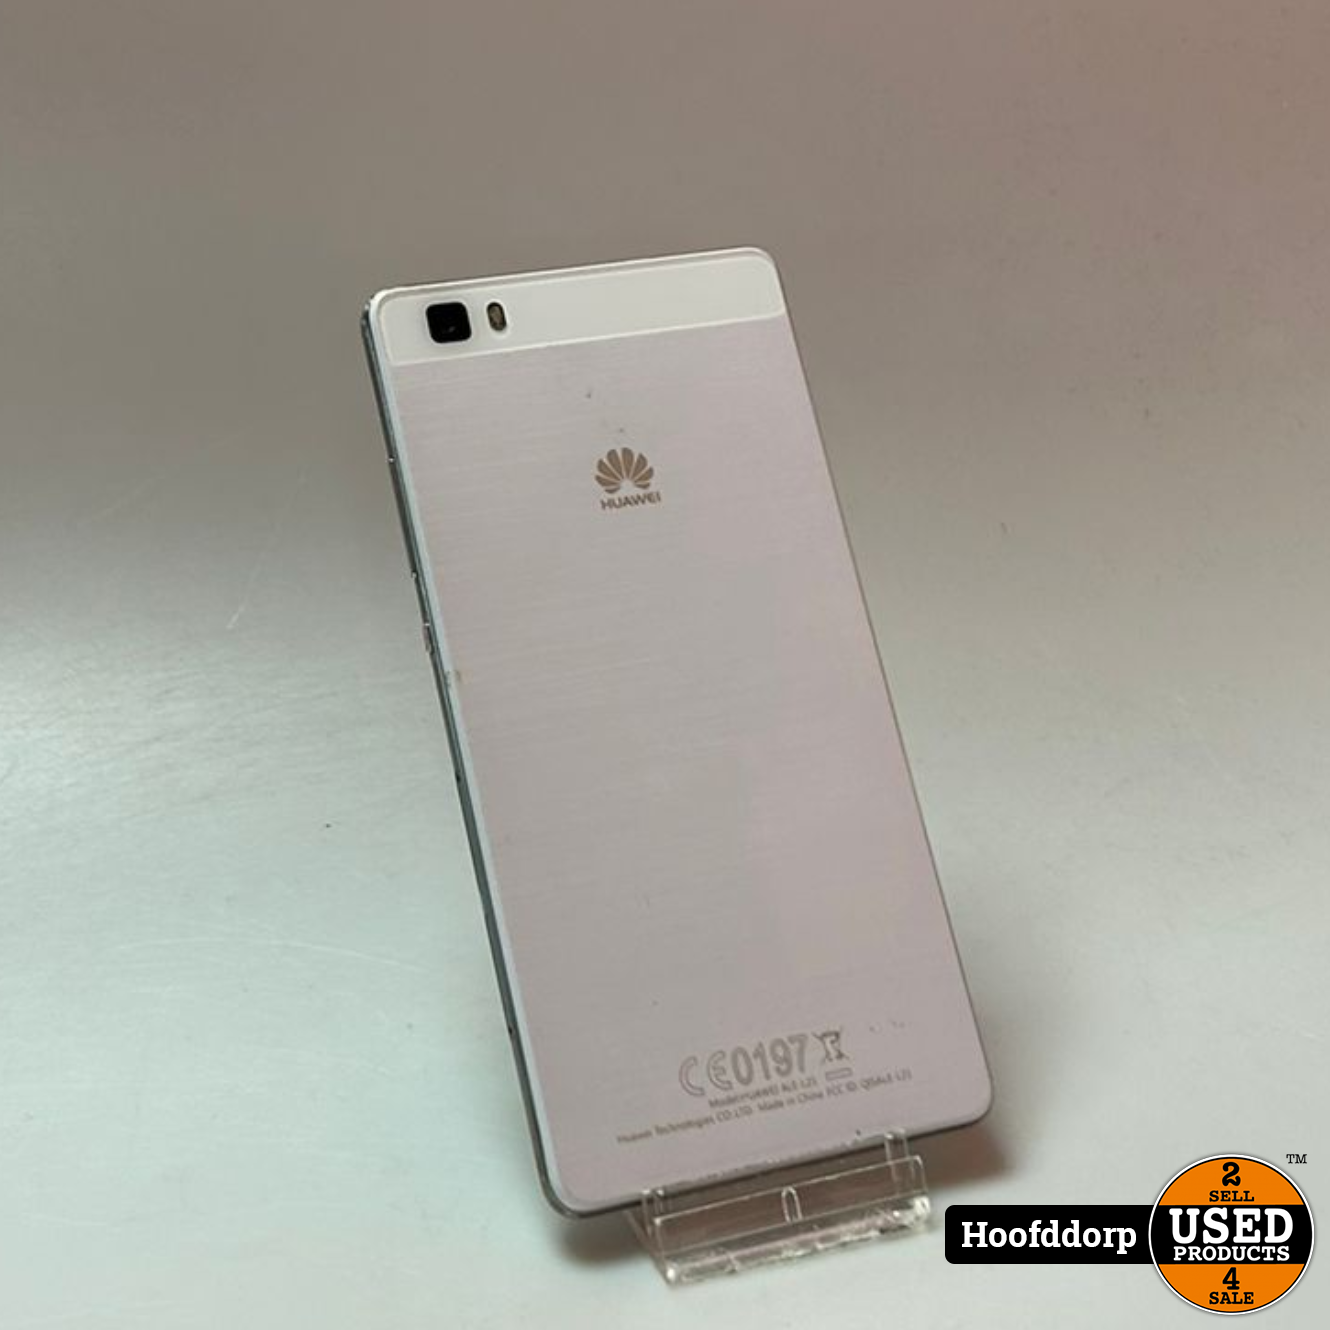 Huawei P8 Lite White 16GB - Products Hoofddorp